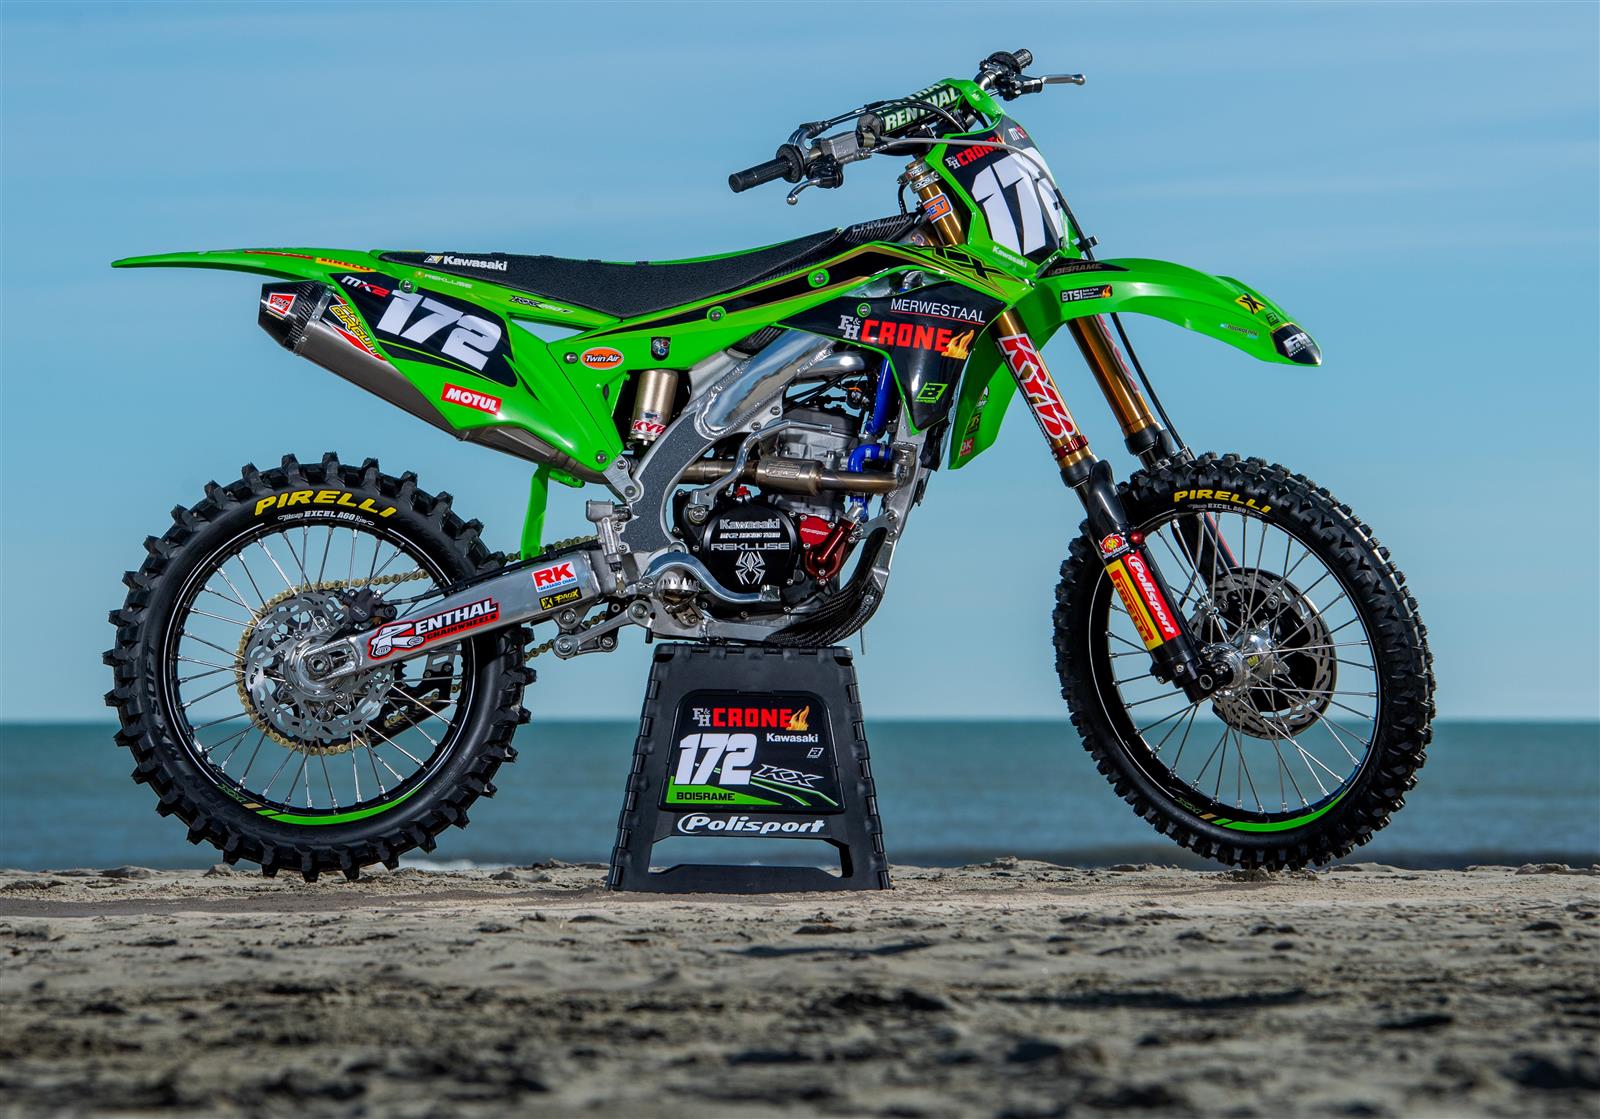 Newsletter The official race report service Kawasaki Racing Team. Newsletter kawasaki Fill in the following fields subscribe to Newsletter. By submitting your data, you agree with the Kawasaki's privacy policy and confirm you have read and ...